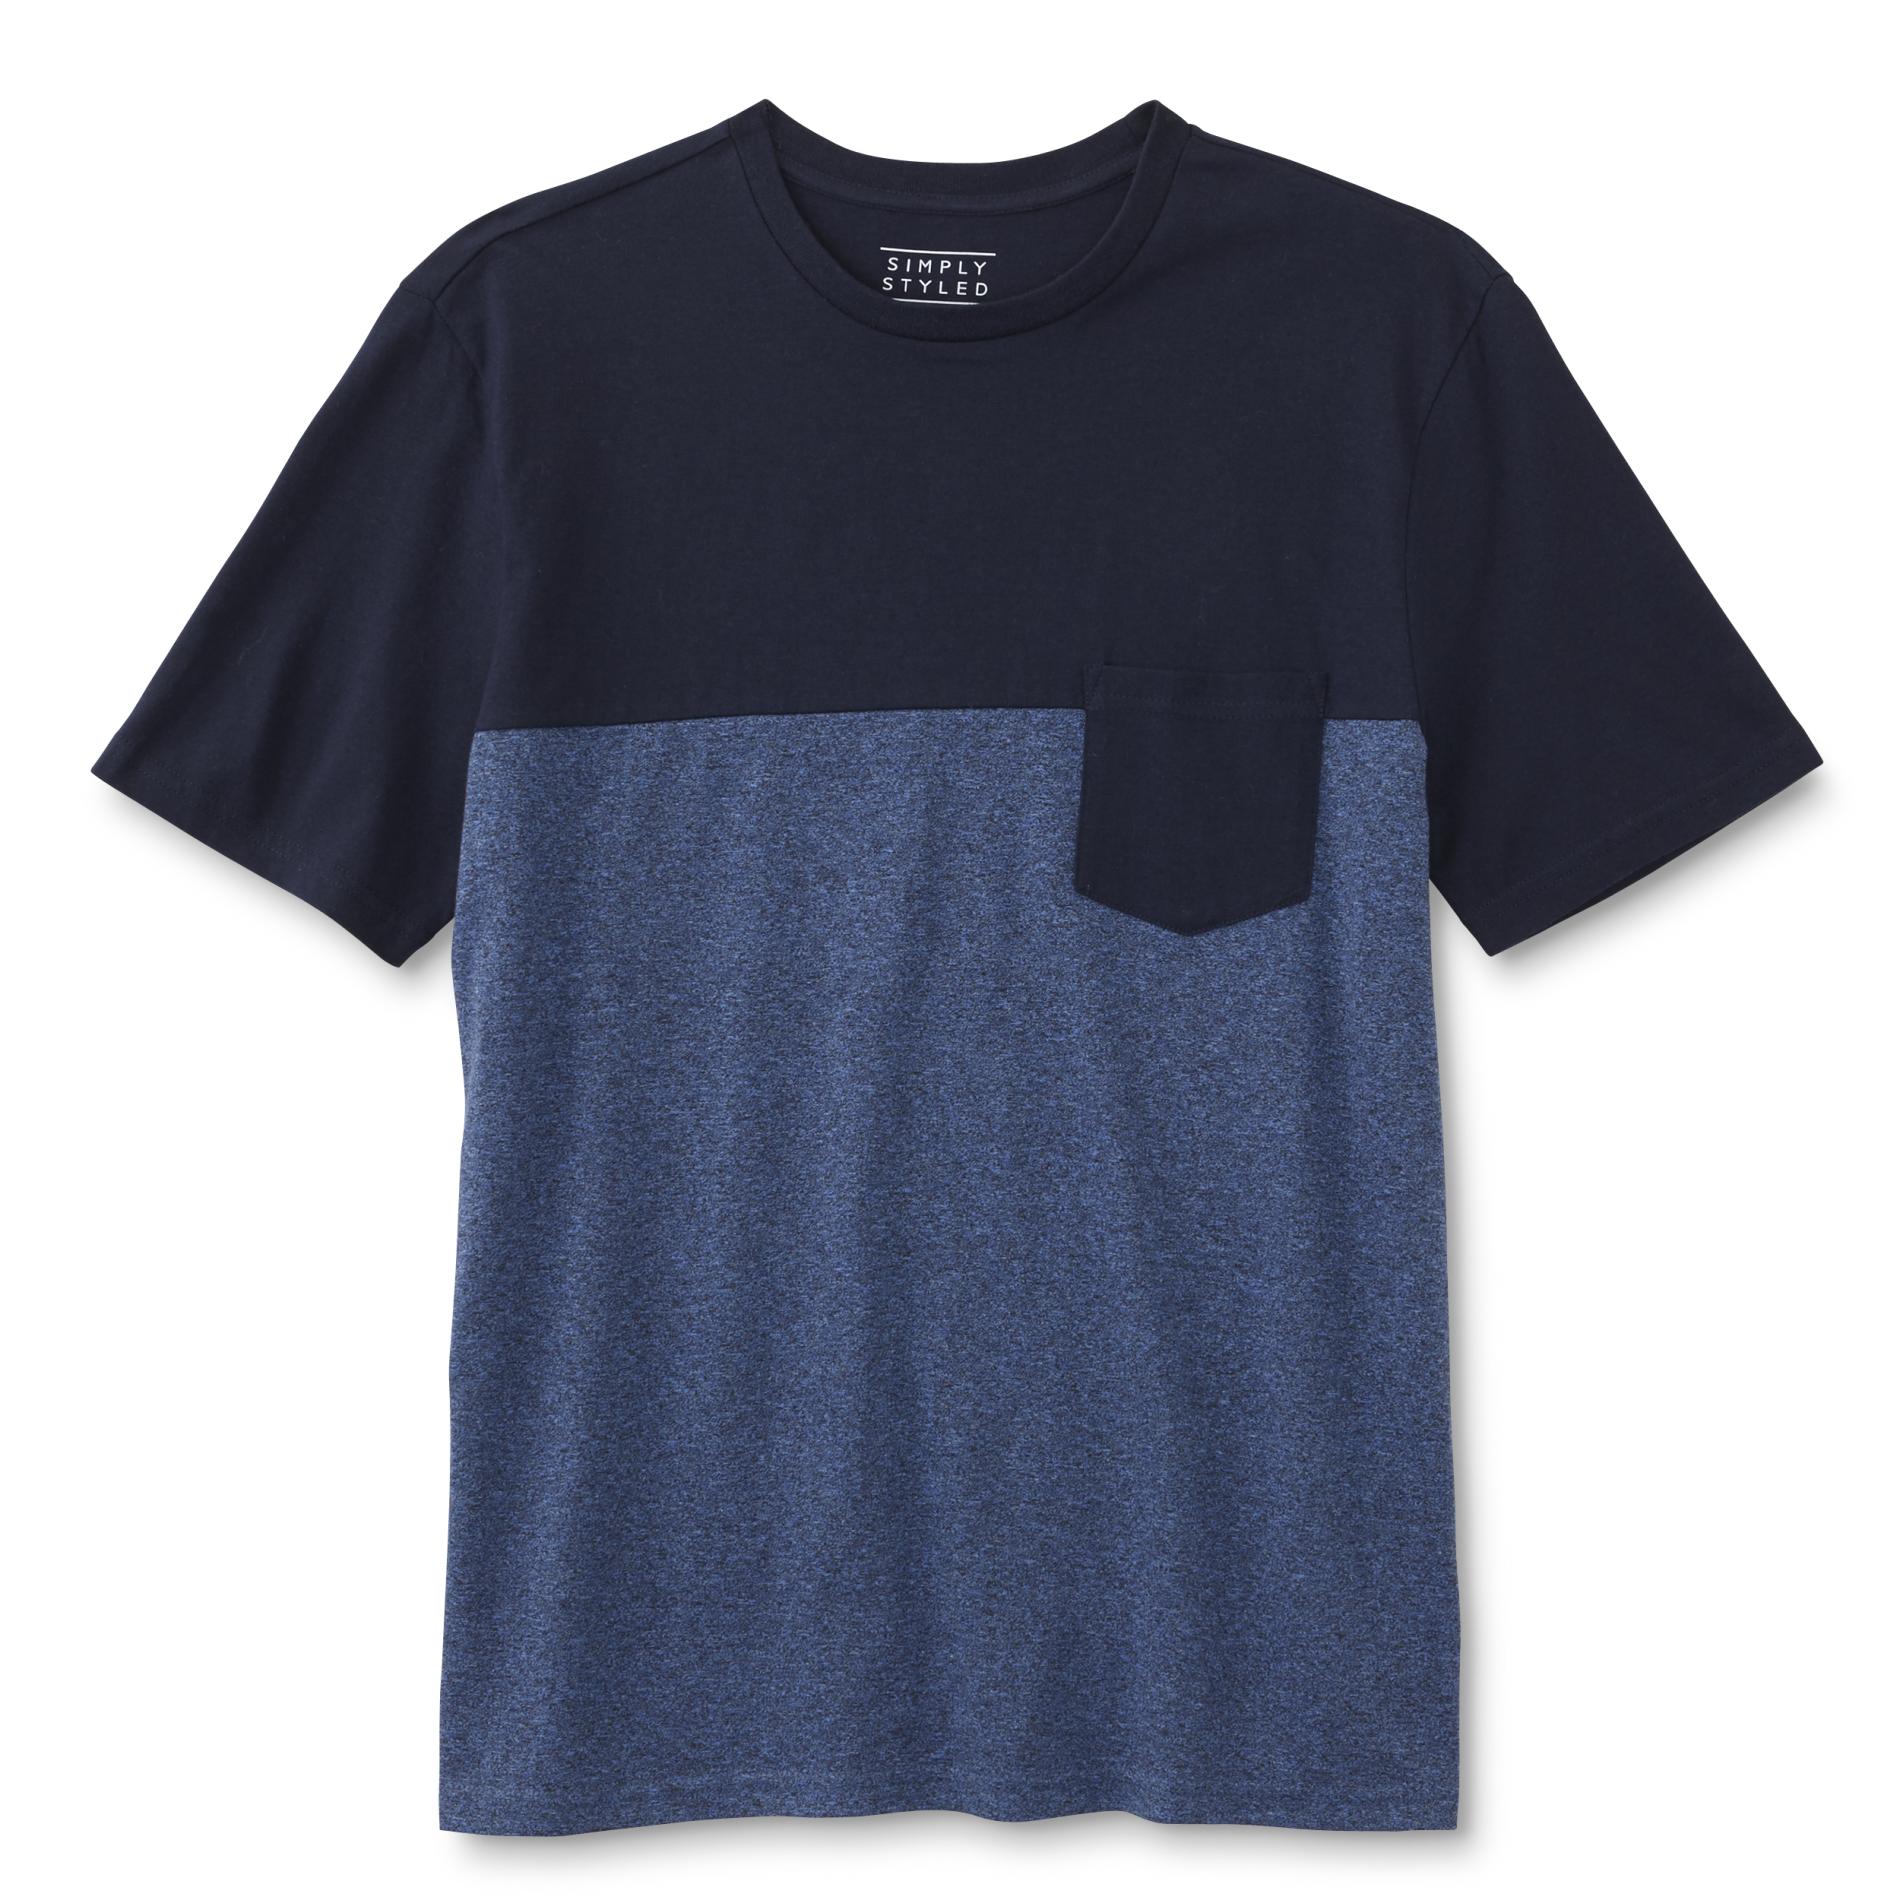 Simply Styled Men's Pocket T-Shirt - Colorblock